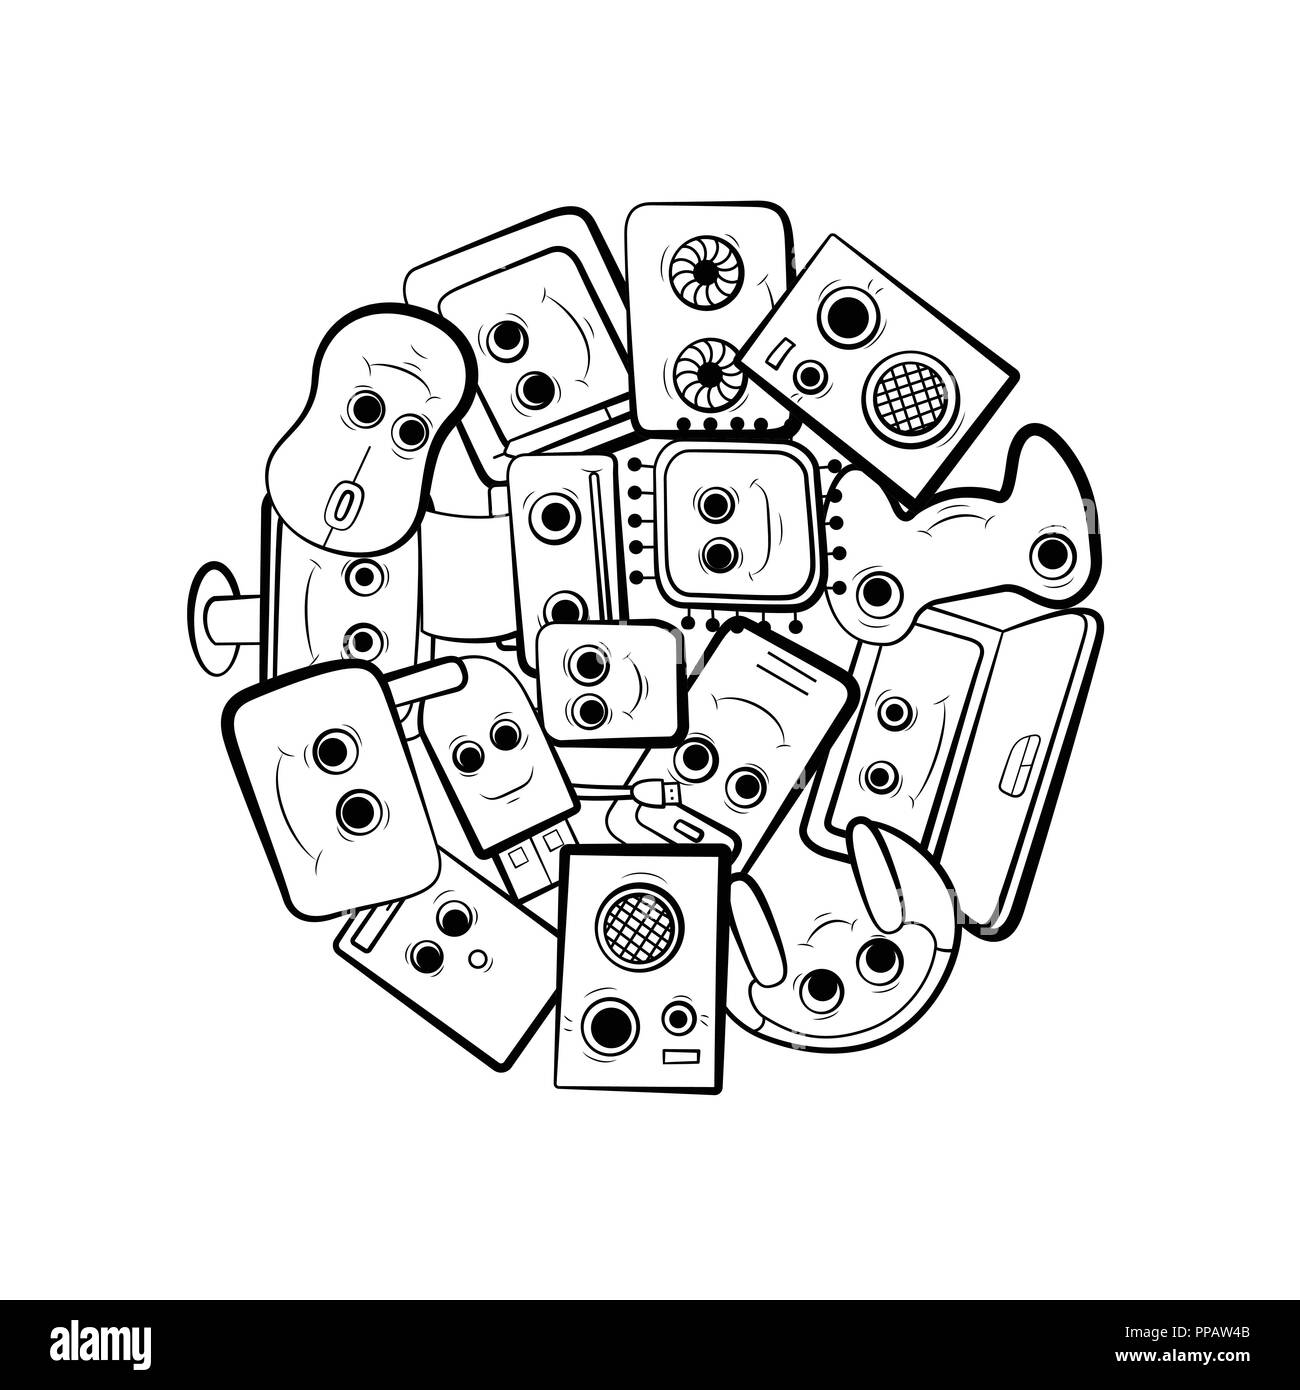 Computer design vector illustration. Coloring book. The cute characters. PC equipment. Stock Vector